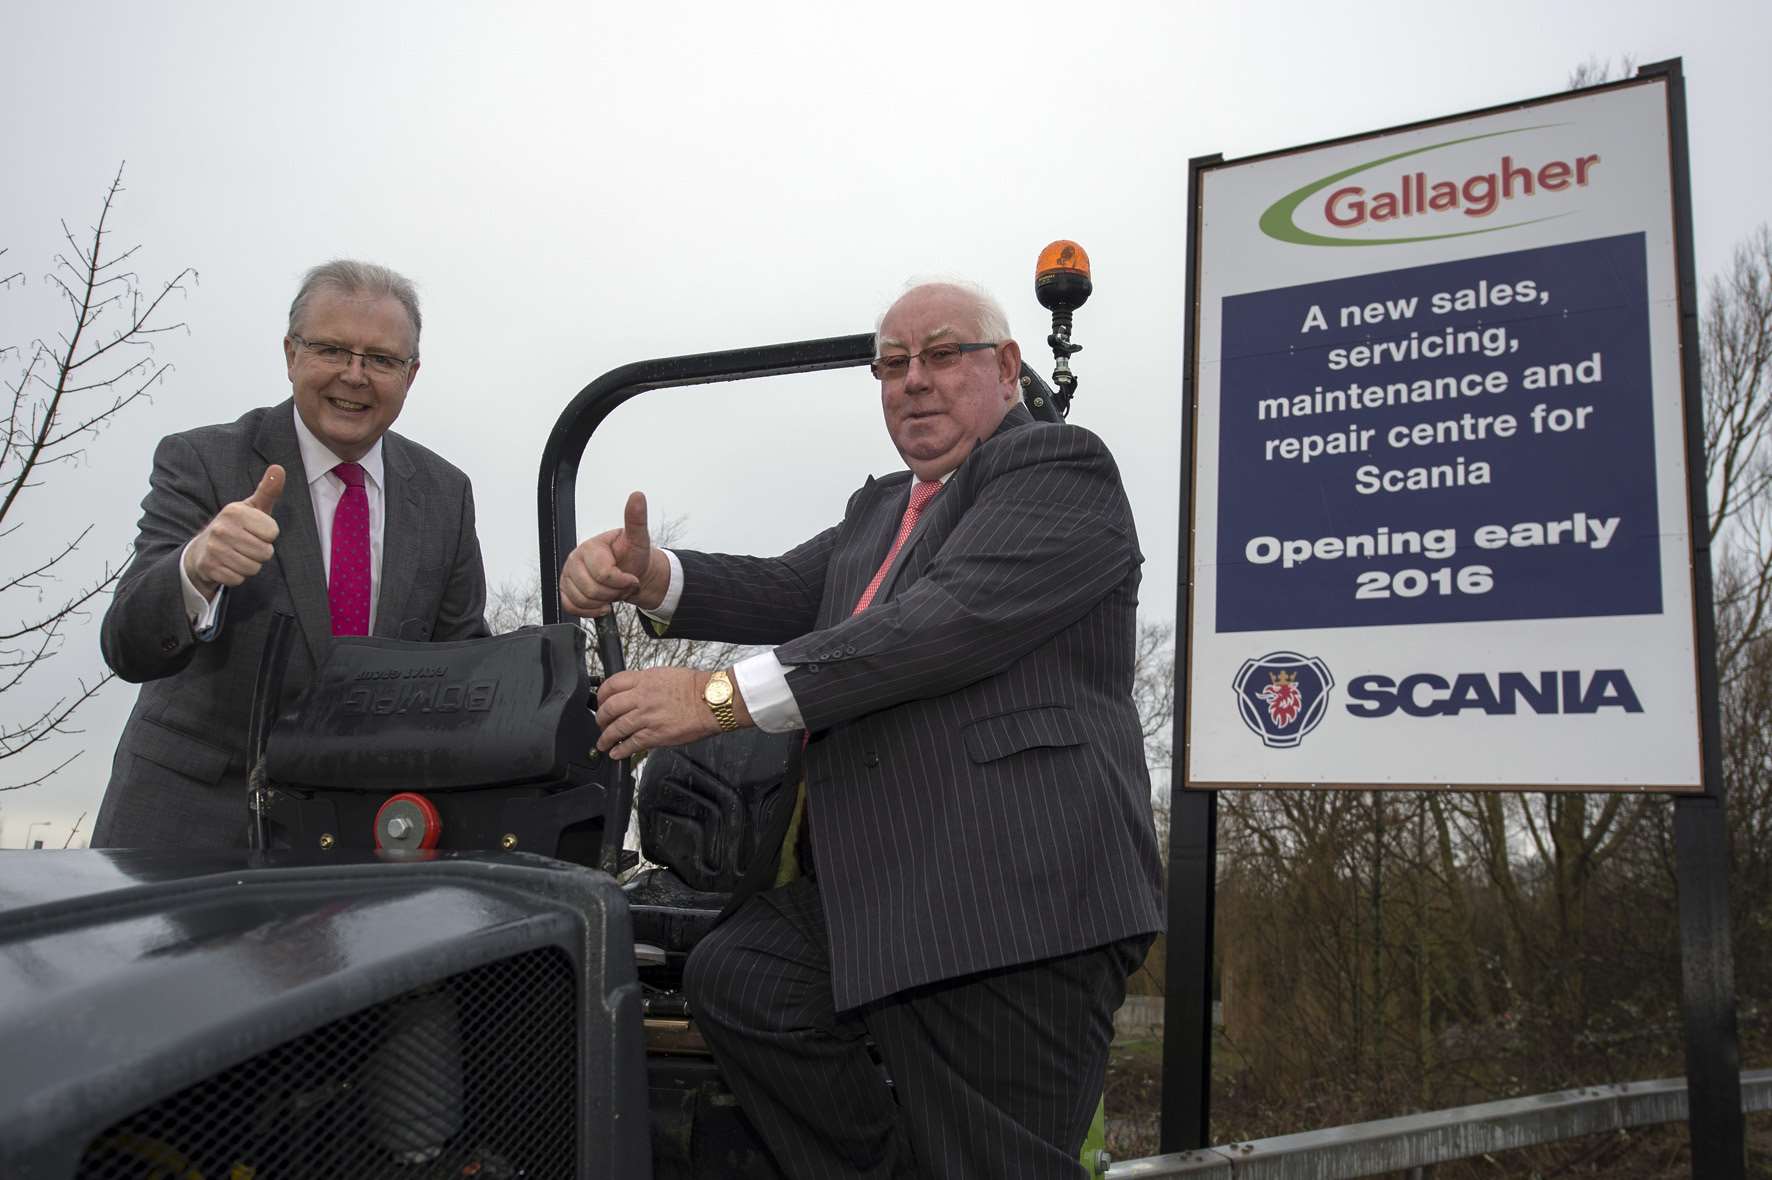 Scania's South East regional executive director Adrian Inscoe, left, with Gallagher group chairman Pat Gallagher